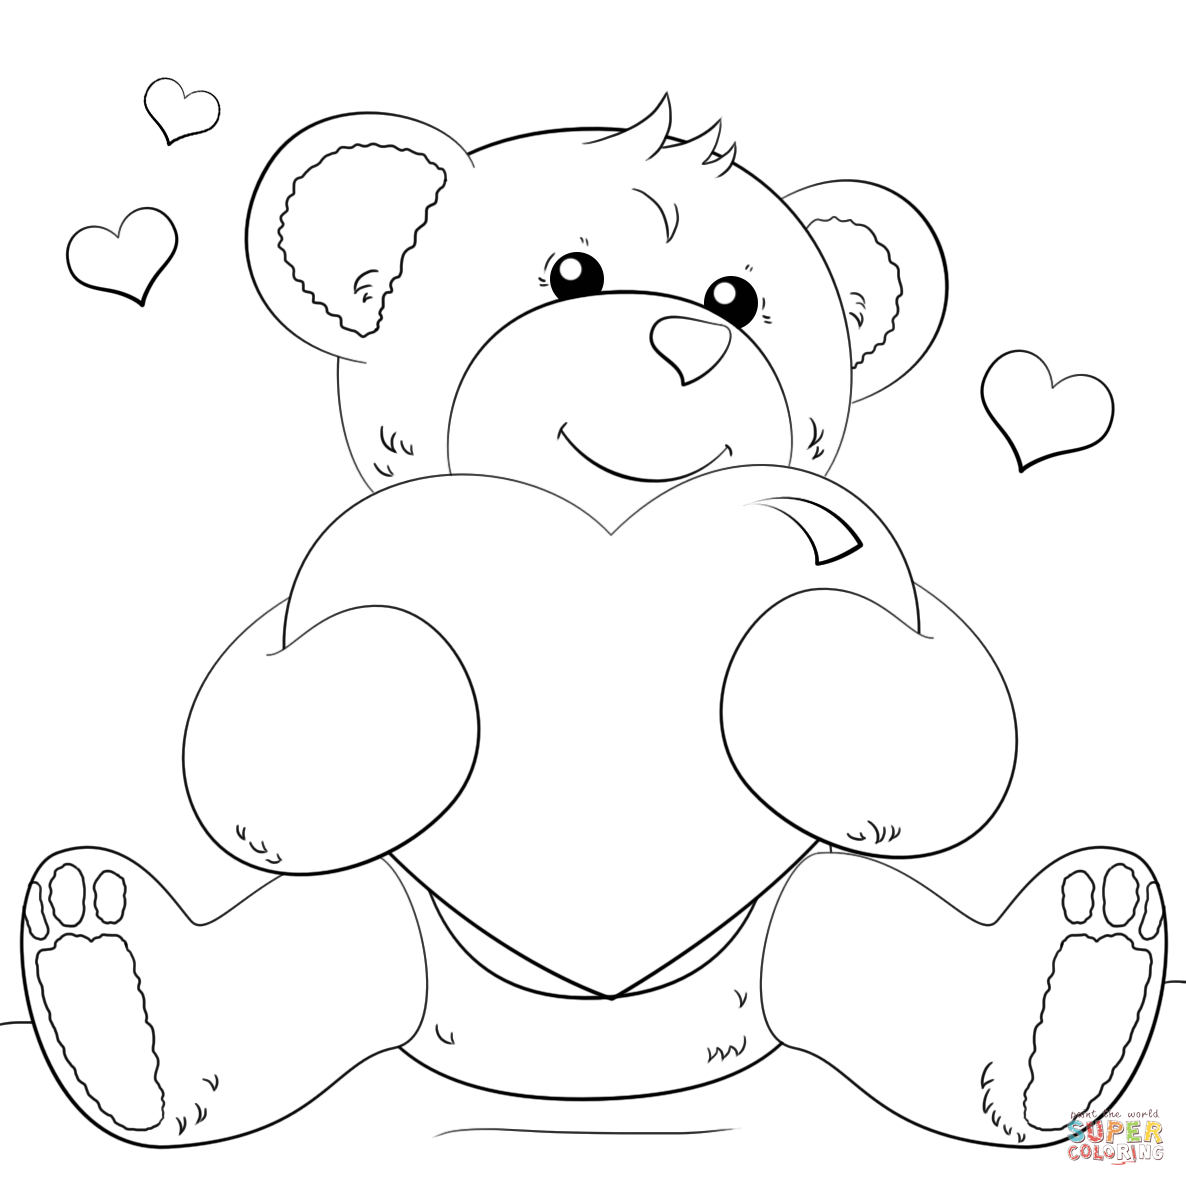 Valentine Teddy Bear Coloring Pages Cute Bear With Heart Coloring Page Free Printable Coloring Pages